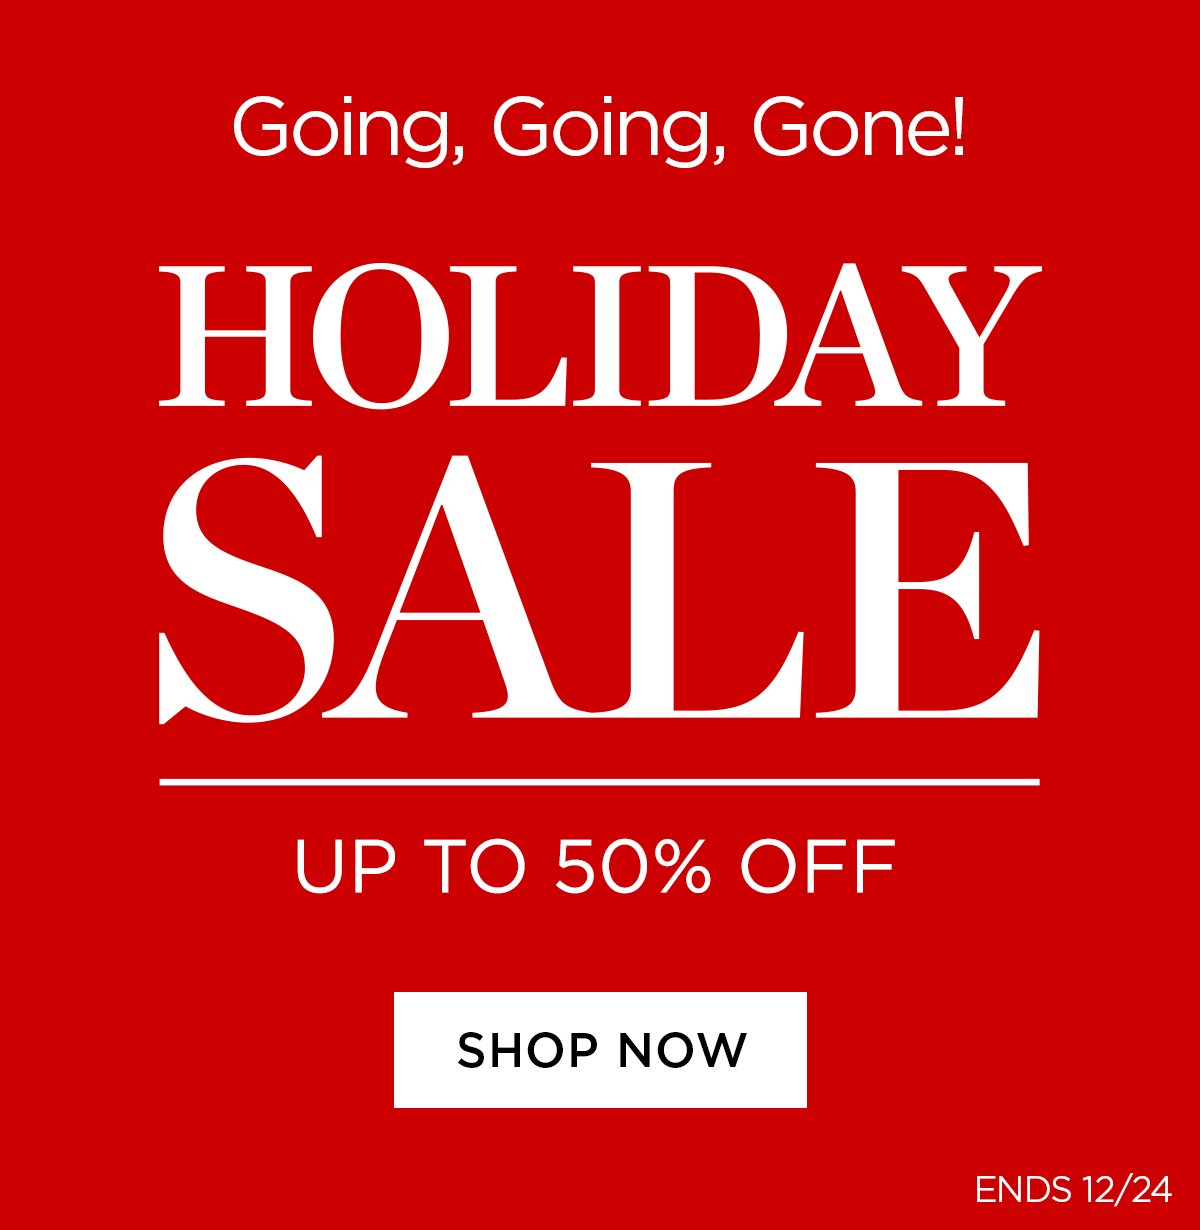 Going, Going, Gone! Holiday Sale Up to 50% Off - Shop Now - Ends 12/24